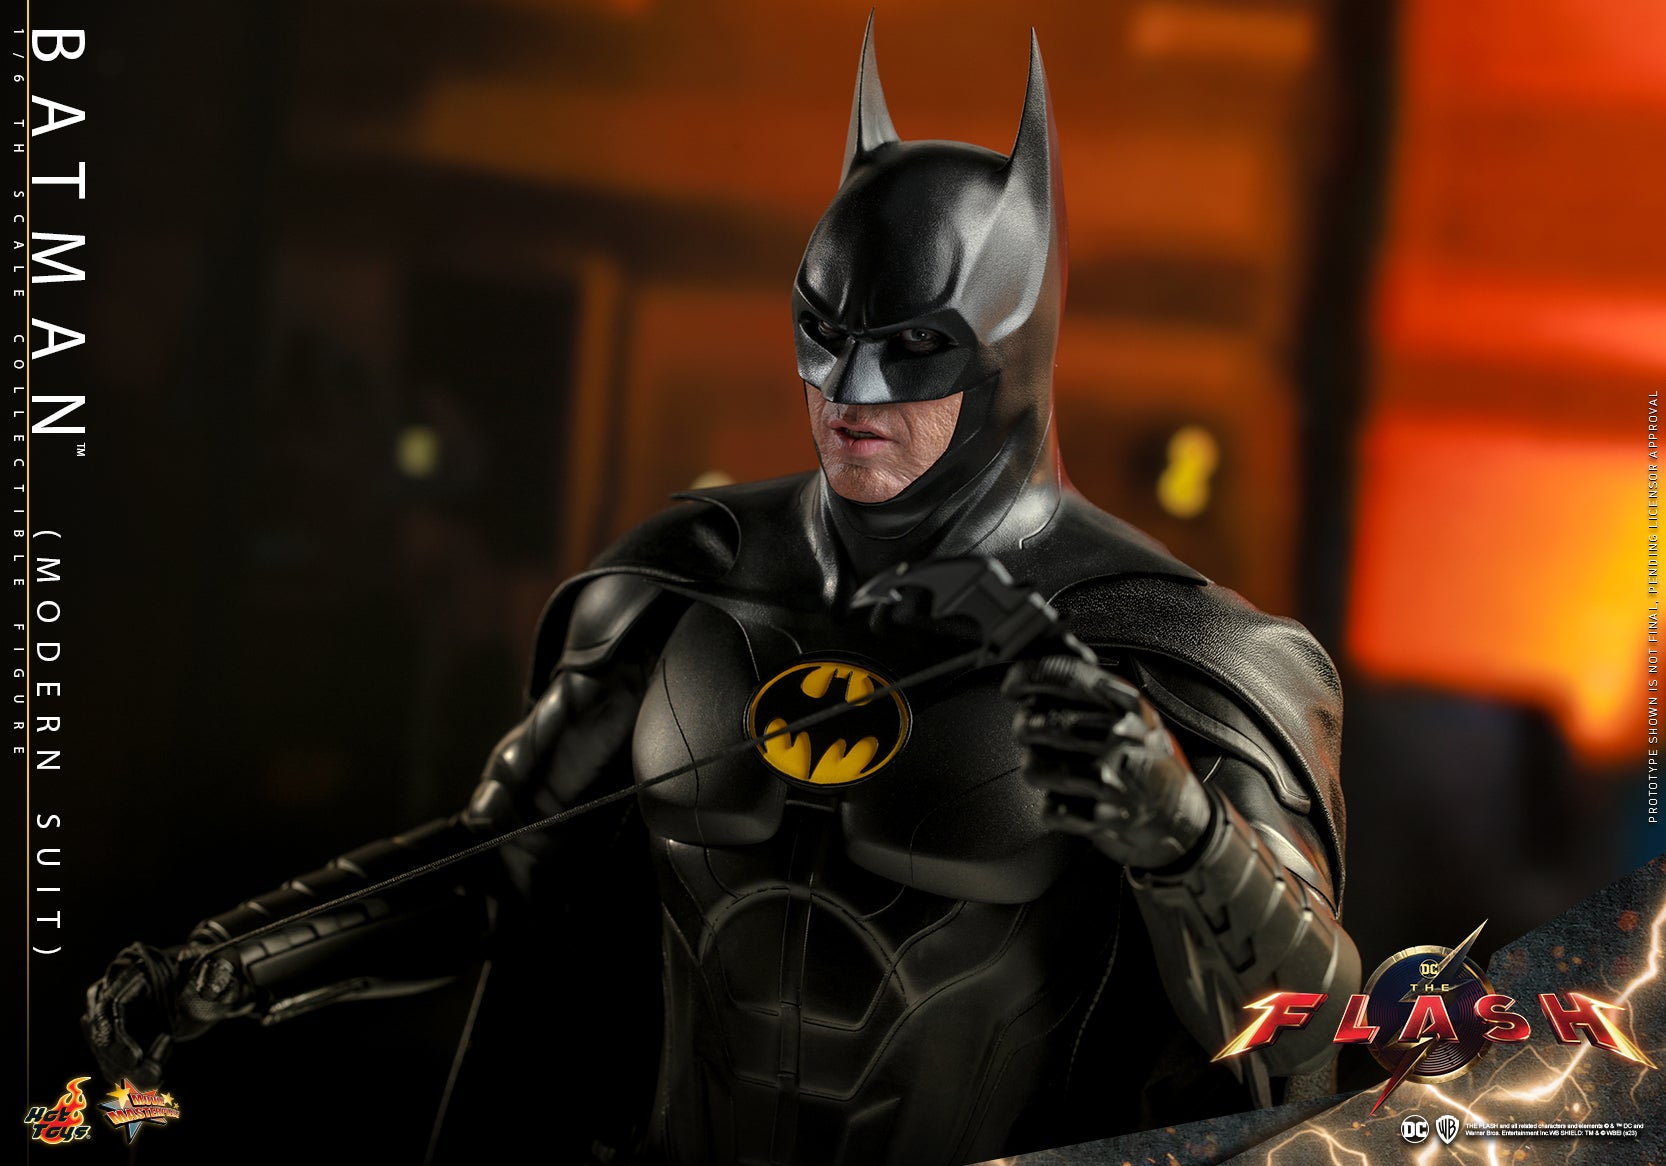 Batman’s Modern Look From The Flash Comes to Life